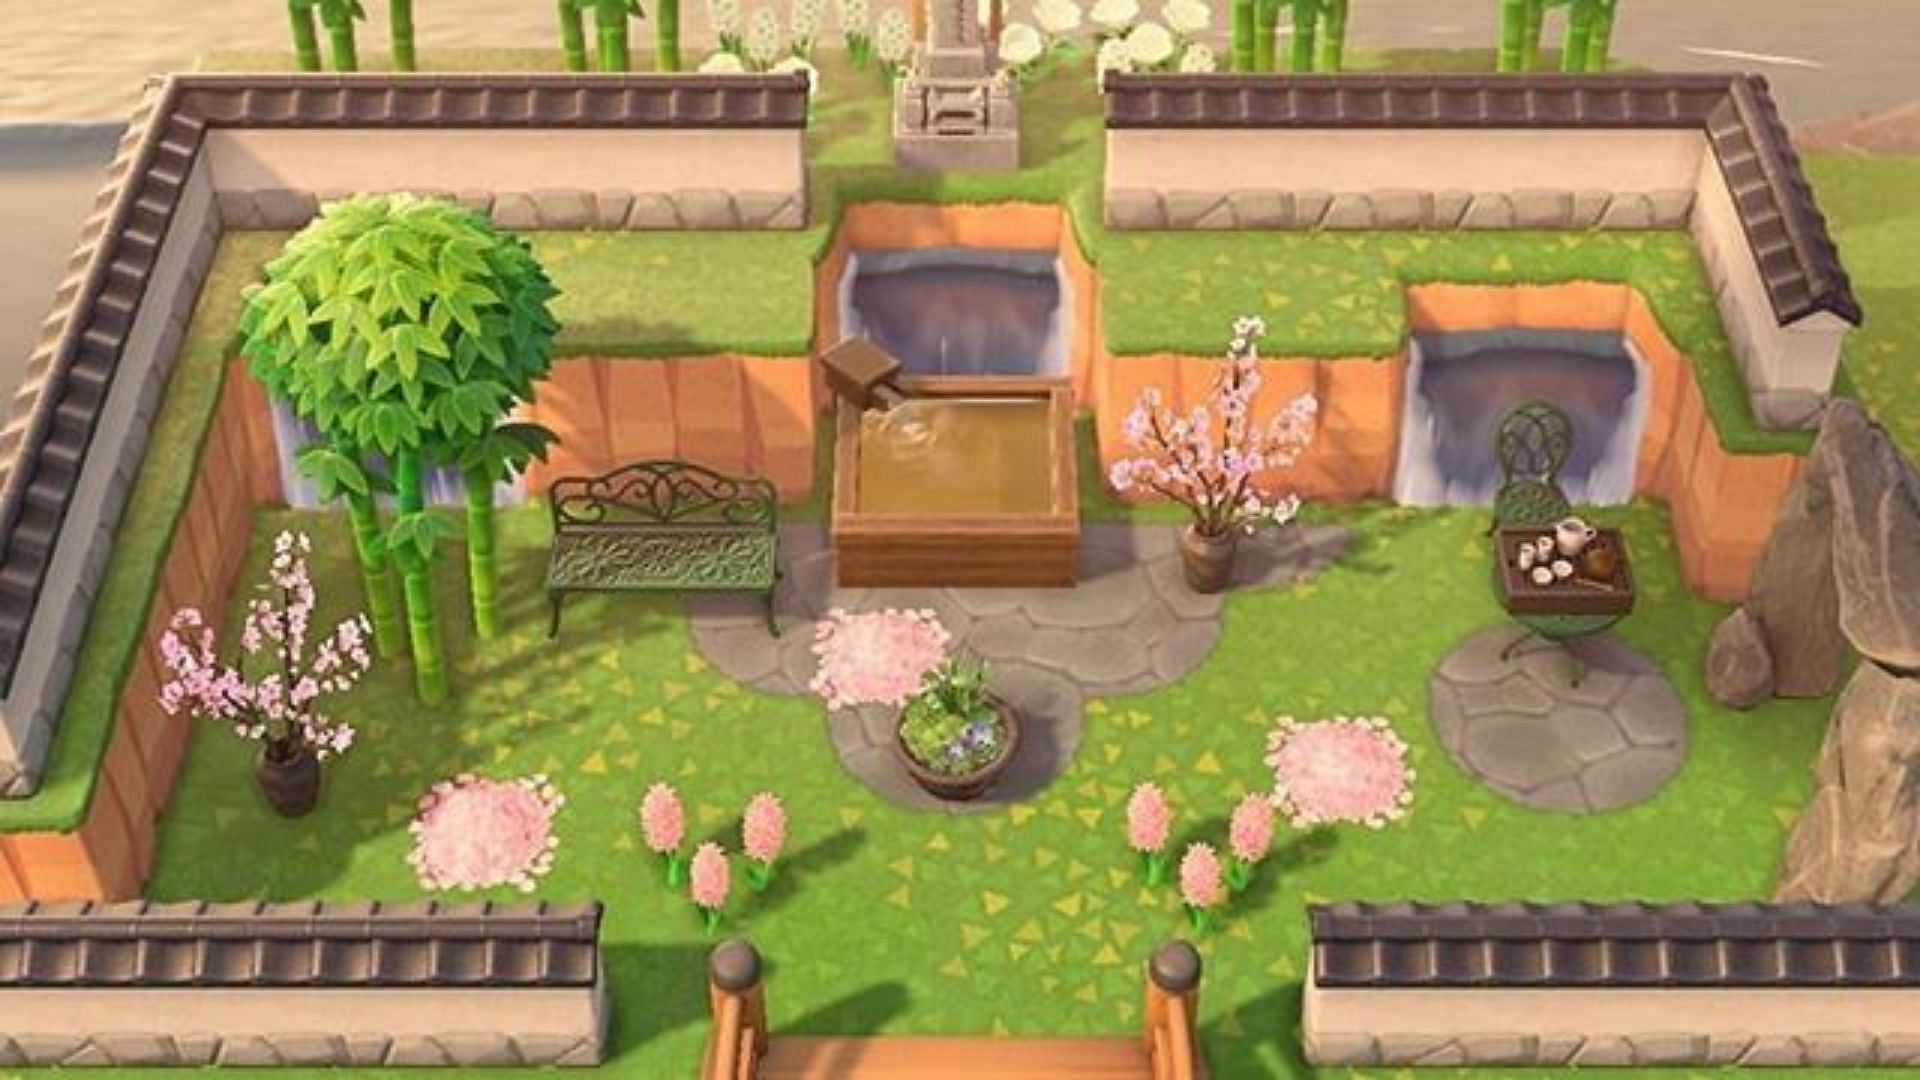 Animal Crossing: New Horizons players come up with the most creative Zen Garden ideas for their islands (Image via Nicole Johnston/Pinterest)